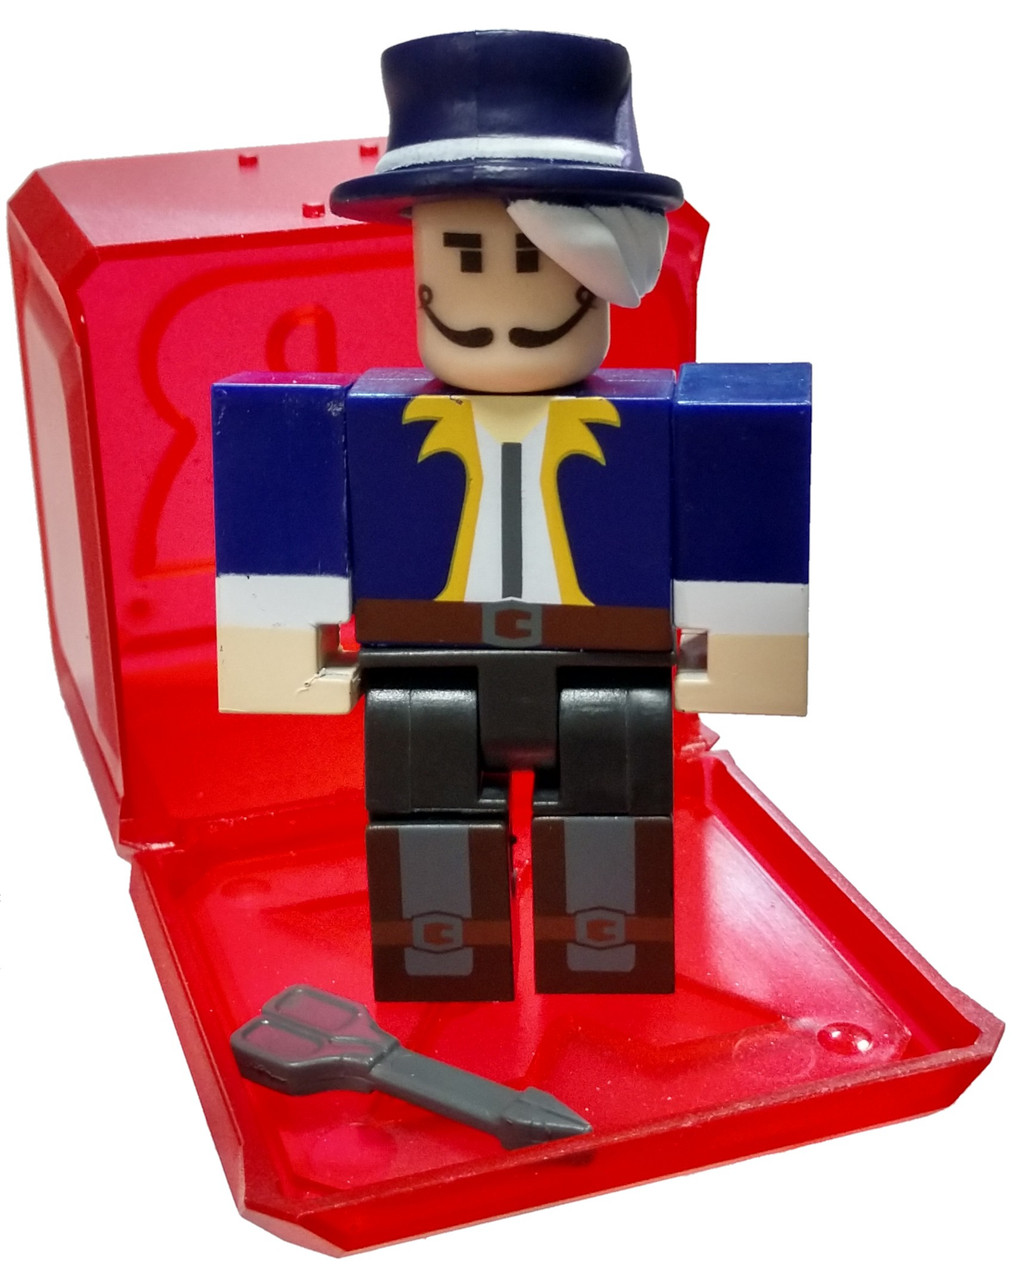 Roblox Celebrity Collection Series 5 Vesteria Barber S 3 Mini Figure With Red Cube And Online Code Loose Jazwares Toywiz - roblox full metal tophat promo code gaiia